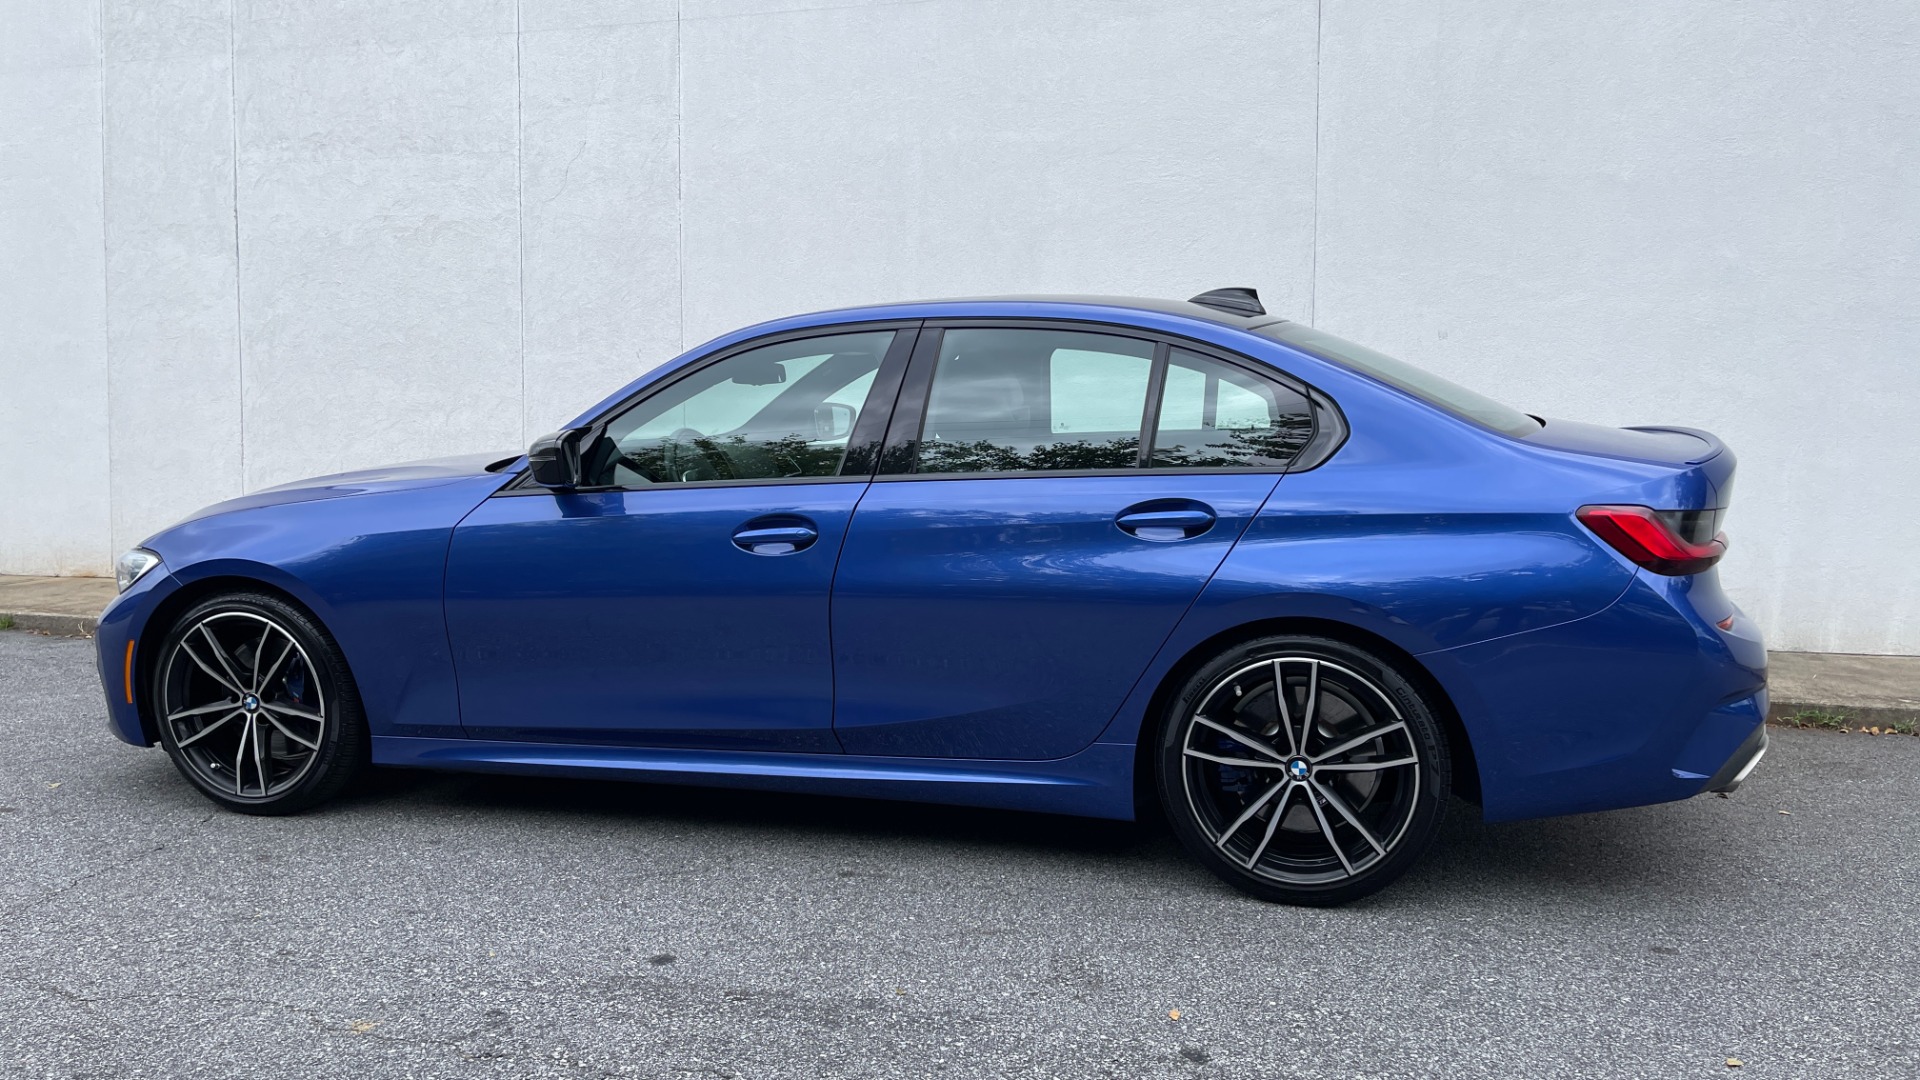 Used 2021 BMW 3 Series M340i / REMOTE START / DRIVING ASSISTANCE / 19IN WHEELS / INTAKE SYSTEM for sale Sold at Formula Imports in Charlotte NC 28227 6